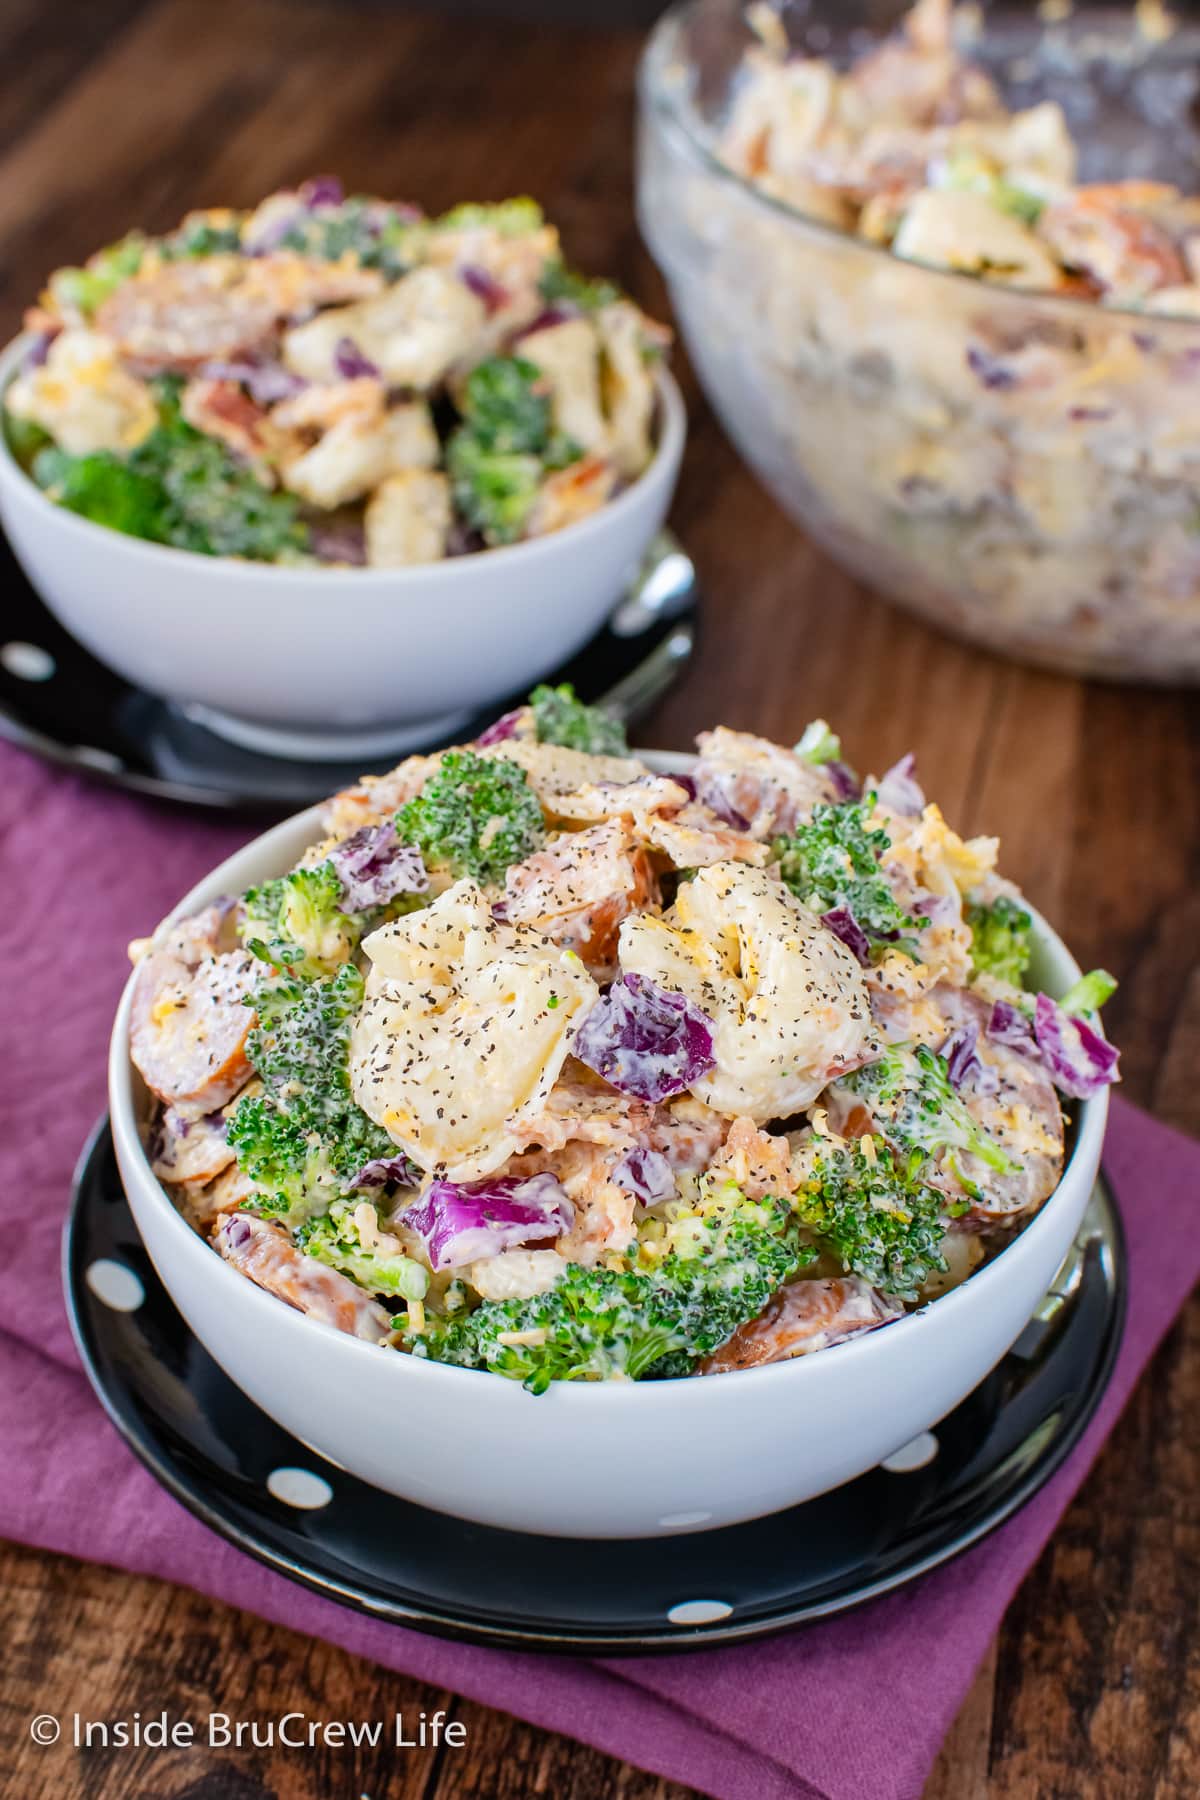 Two white bowls filled with a creamy pasta salad with veggies.